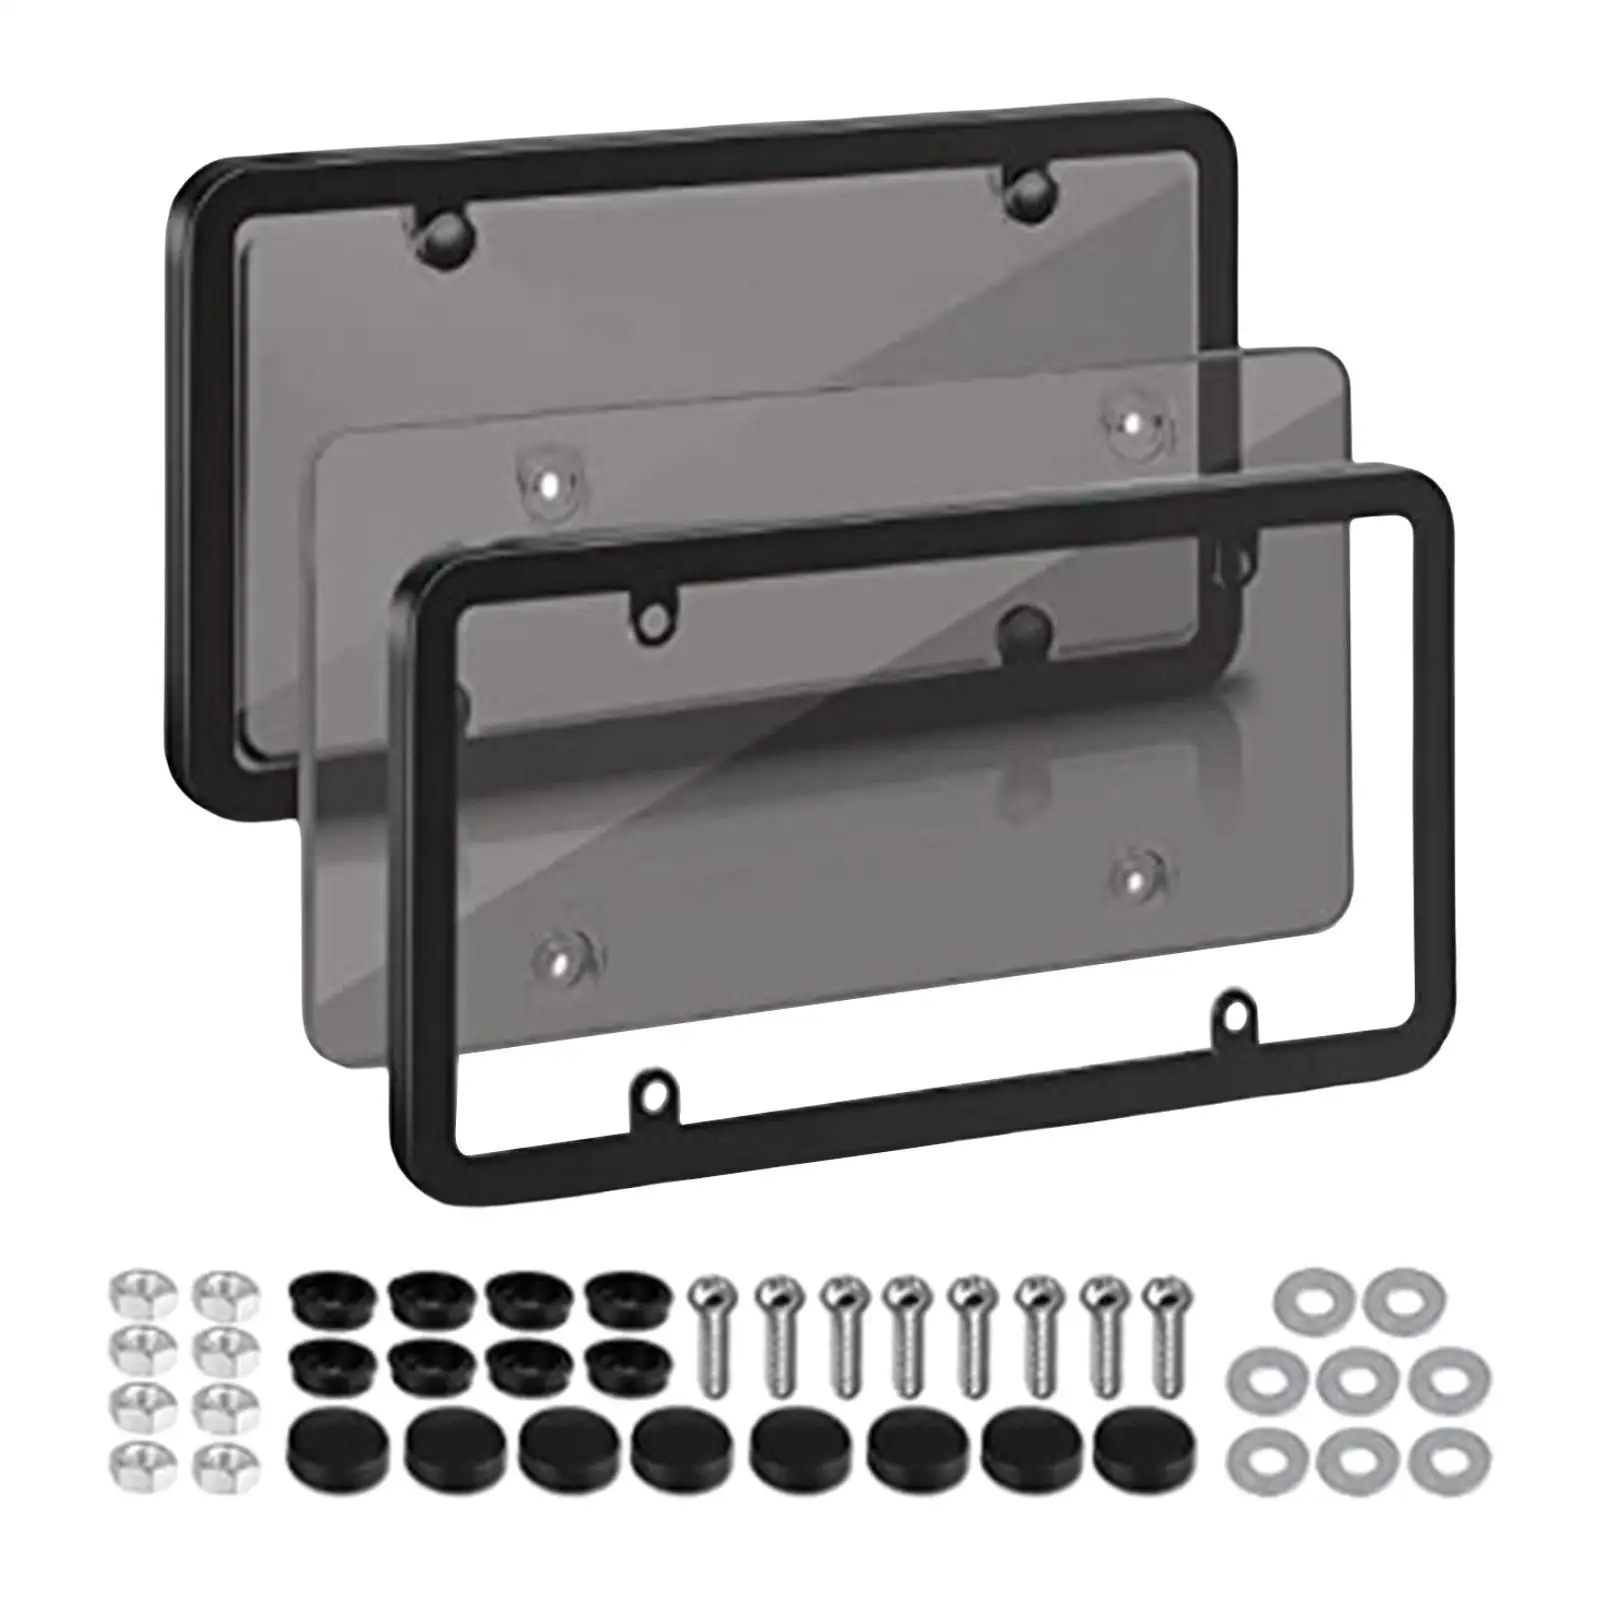 Universal American Plate Frame Car Plate Frame for Vehicles